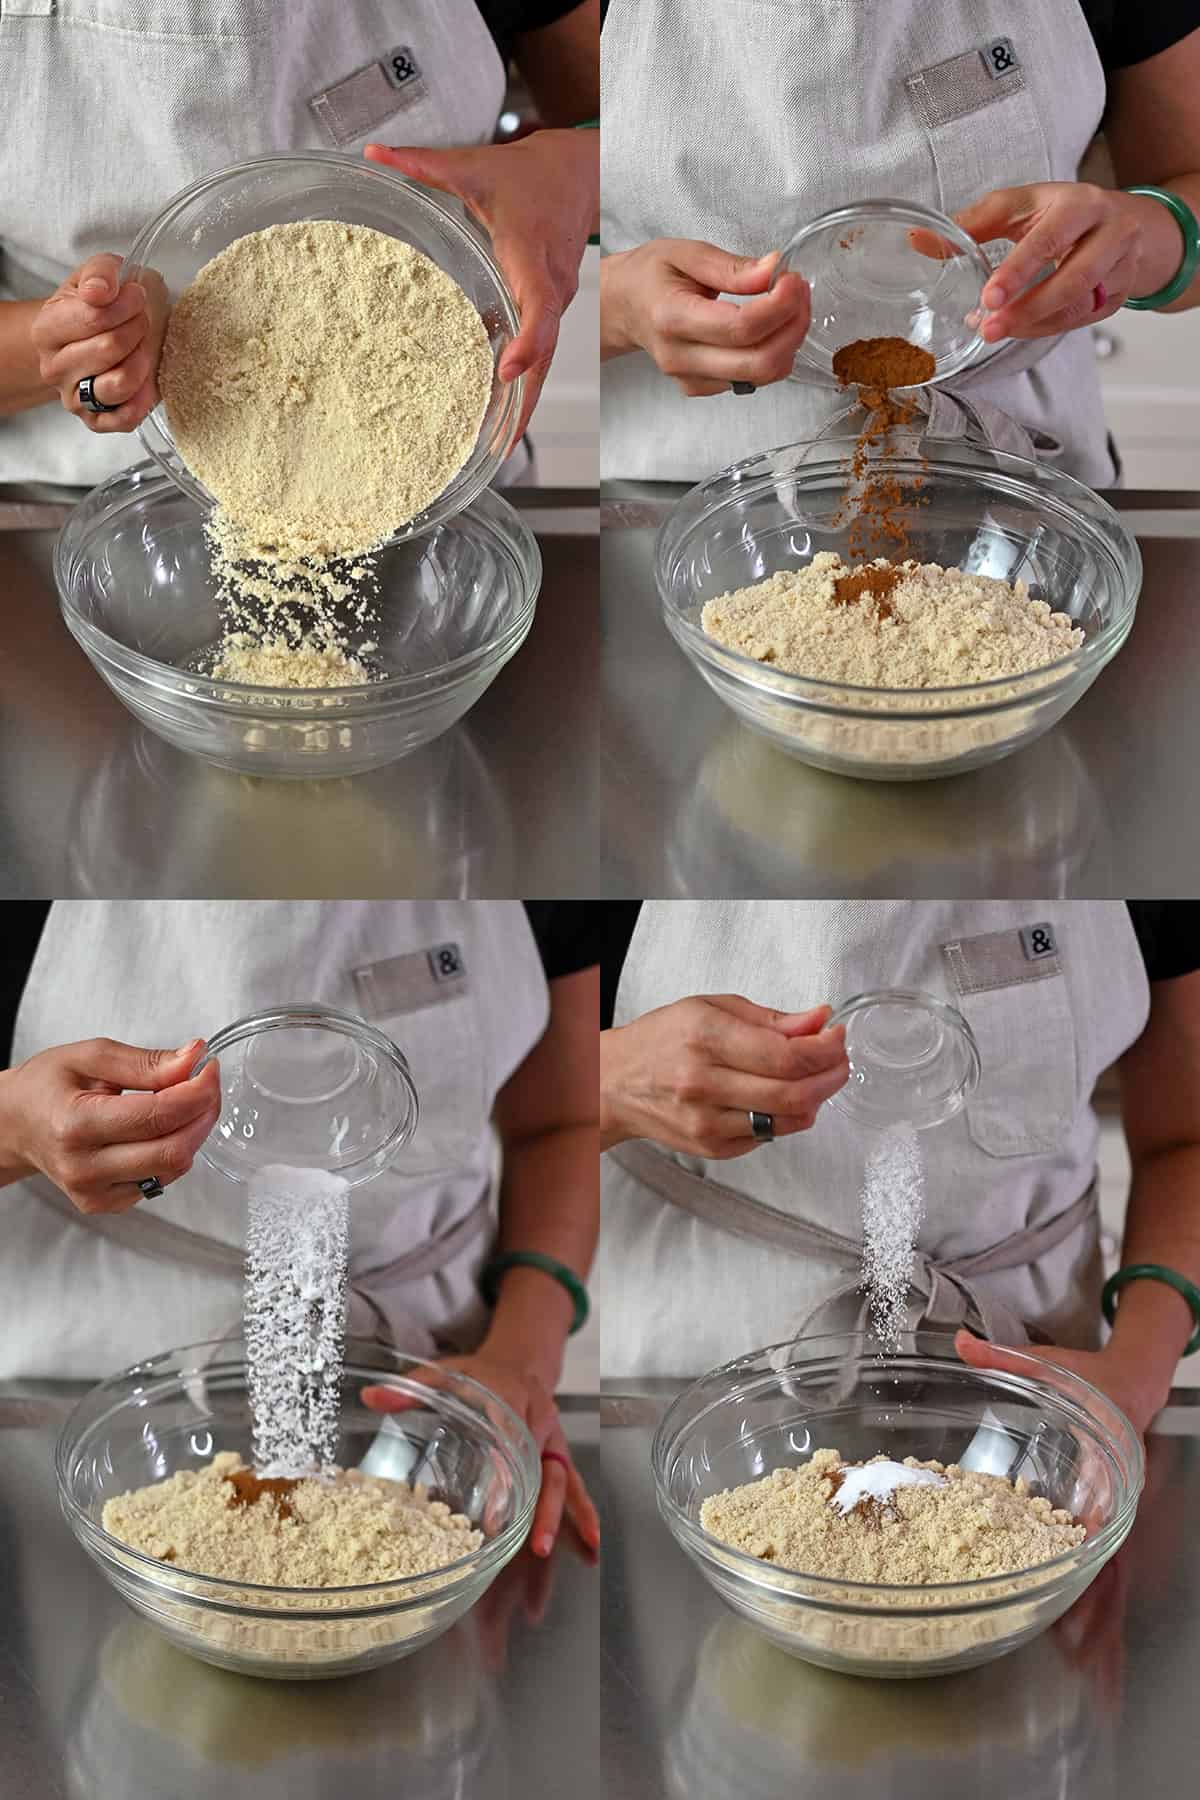 Four sequential shots that show someone adding the dry ingredients (almond flour, ground cinnamon, baking soda, cream of tartar) into a clear glass mixing bowl to make paleo apple muffins.